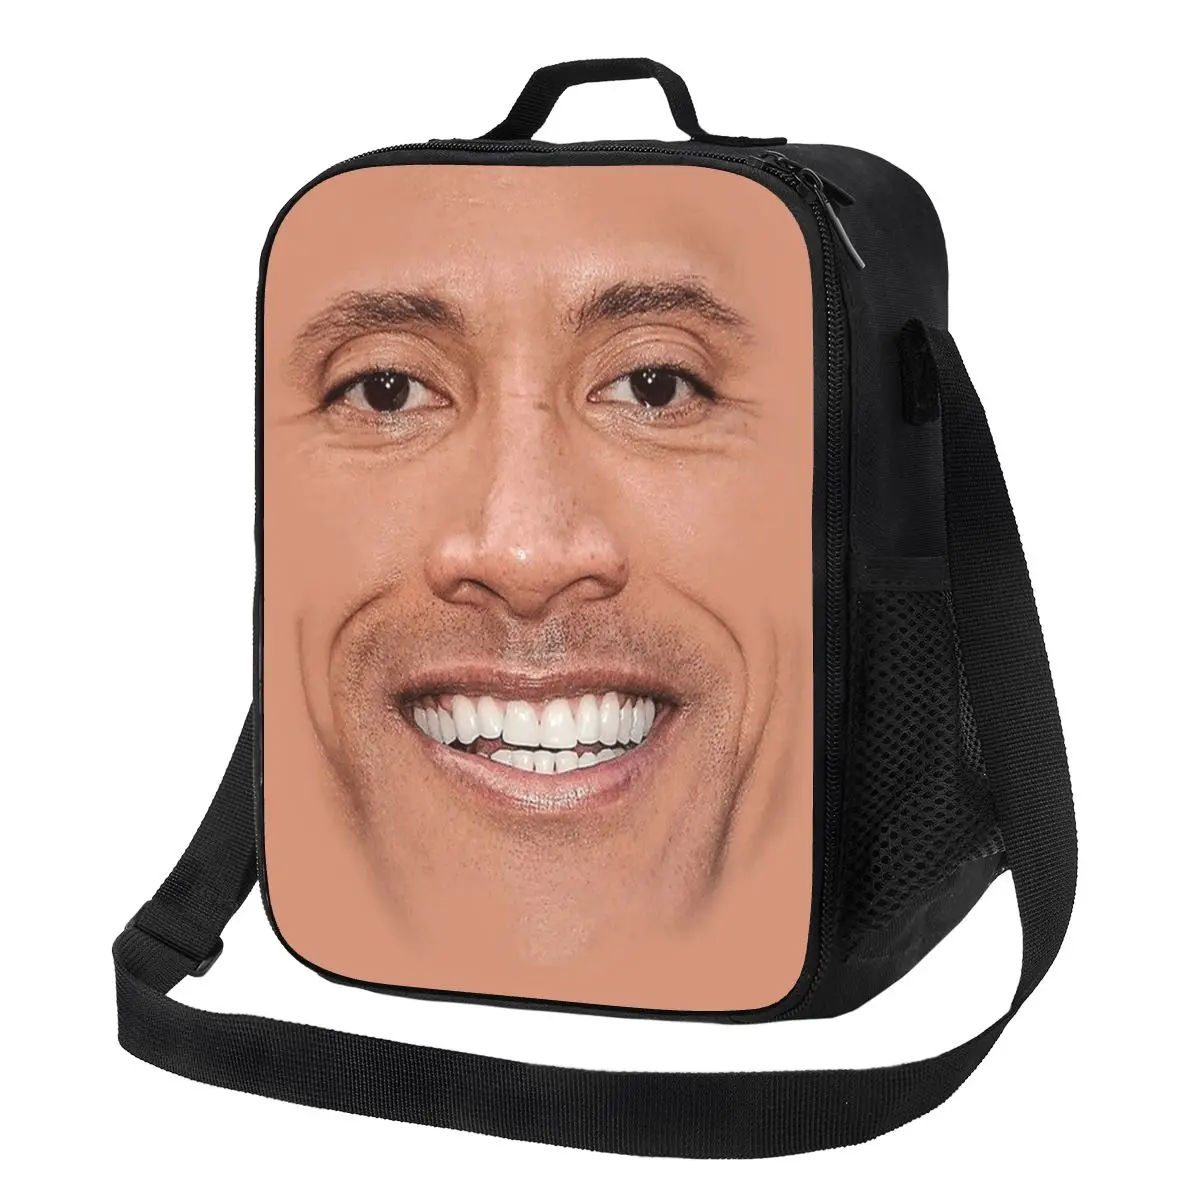 

The Rock Face Dwayne Resuable Lunch Box Leakproof American Actor Johnson Cooler Thermal Food Insulated Lunch Bag Office Work